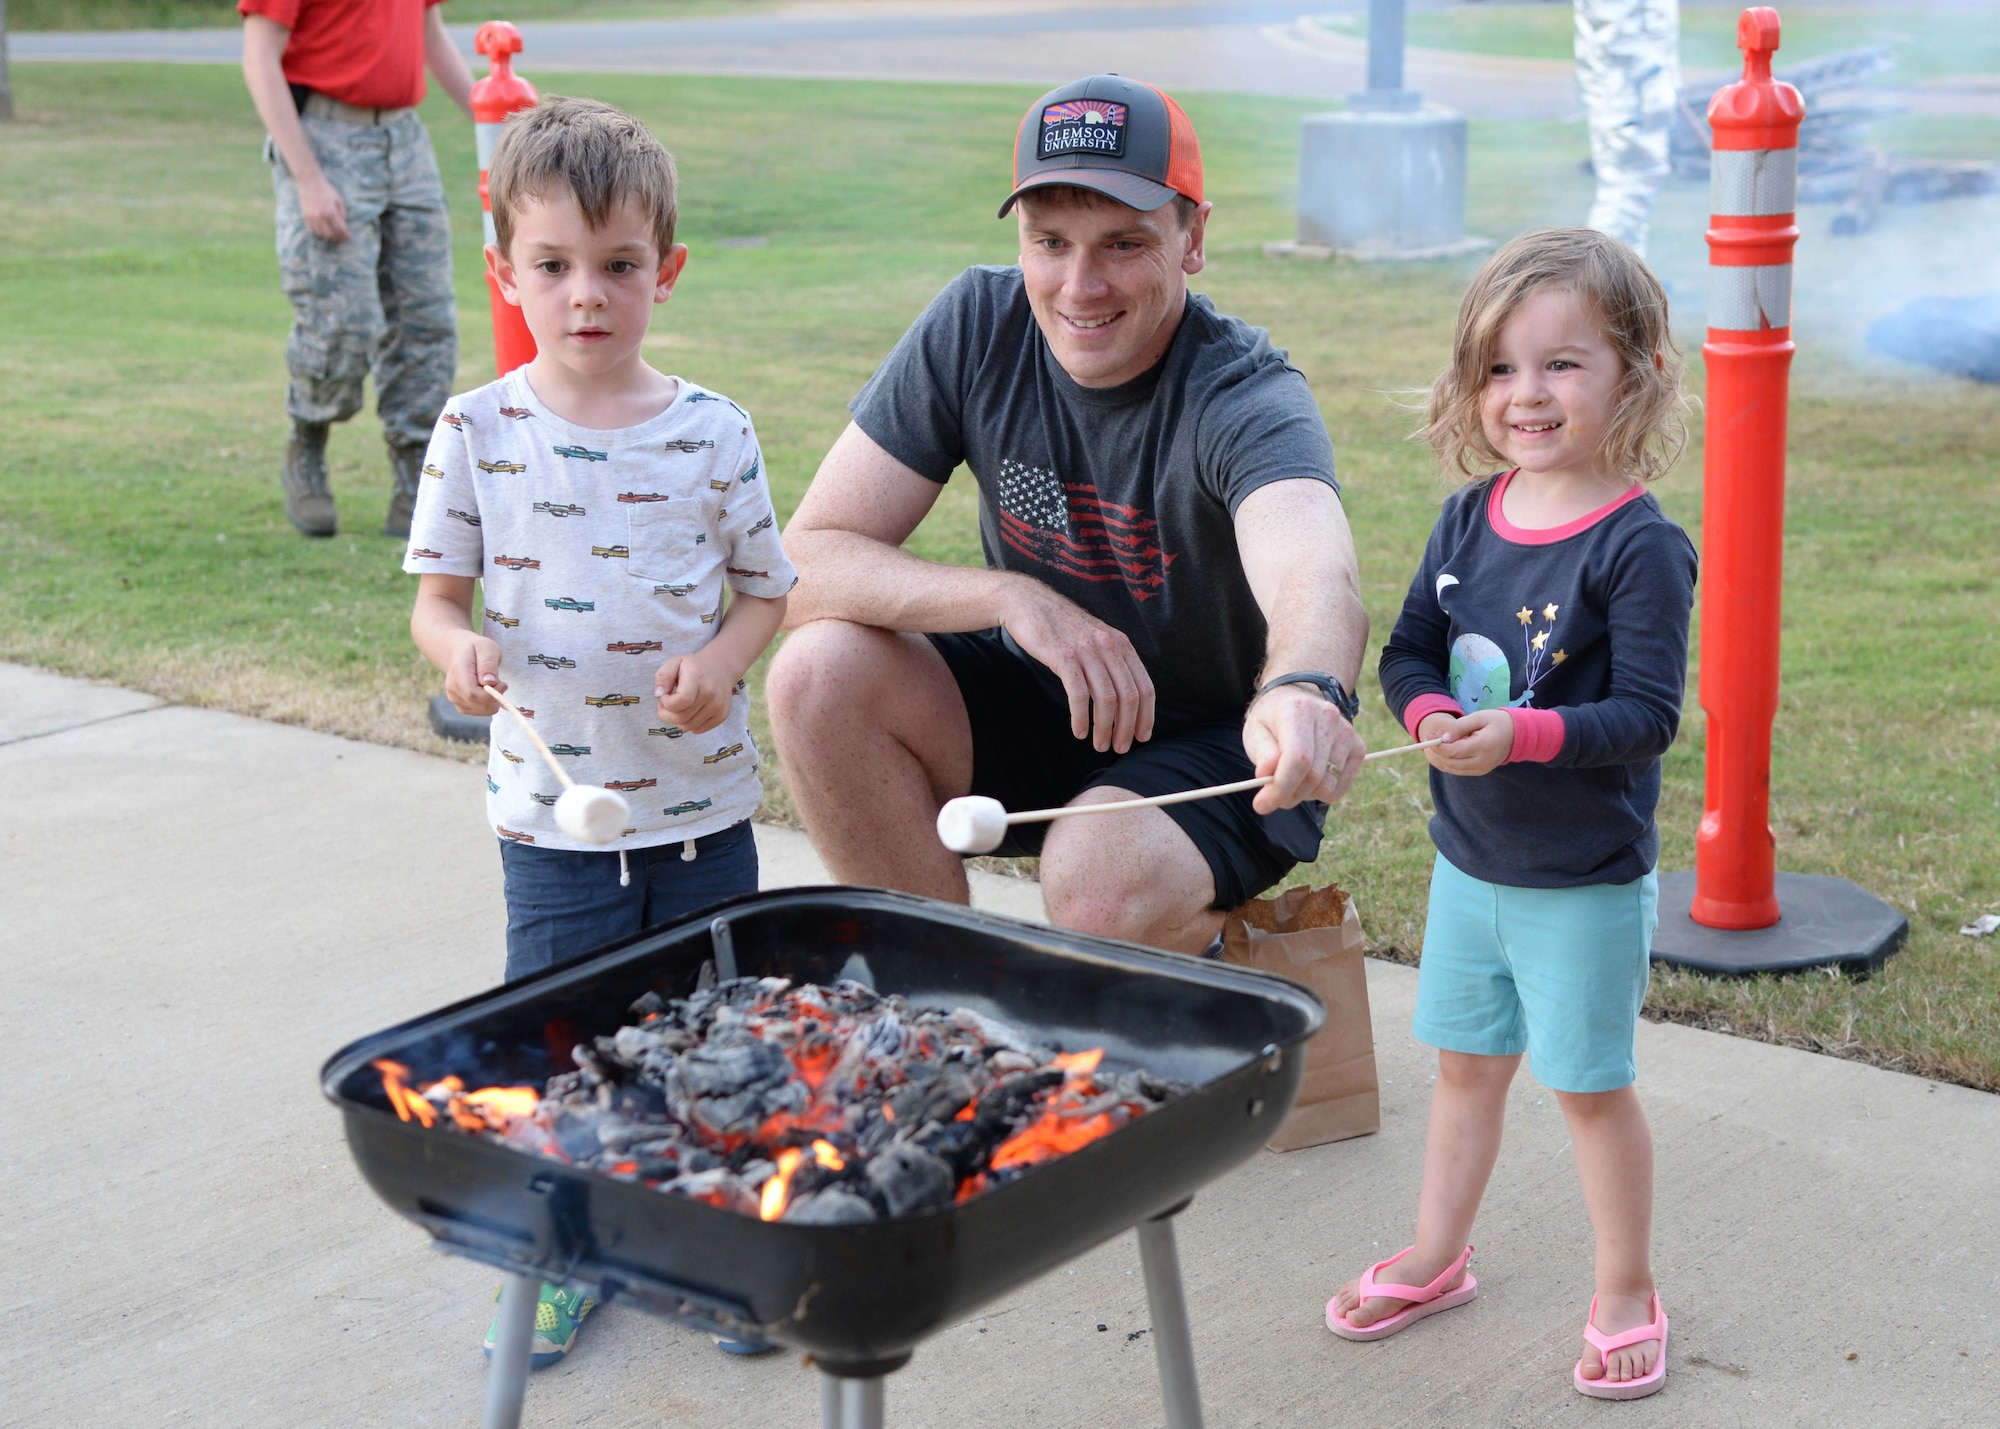 Capt. Zachary Shuler, 14th Operations Group Standards and Evaluation, and his two children, Grady and Paige, roast marshmallows Sept. 29, 2017, on Columbus Air Force Base, Mississippi. The Columbus Fire Department hosted multiple family activities in honor of Fire Prevention Week Sept. 25-30. (U.S. Air Force photo by Airman 1st Class Beaux Hebert)